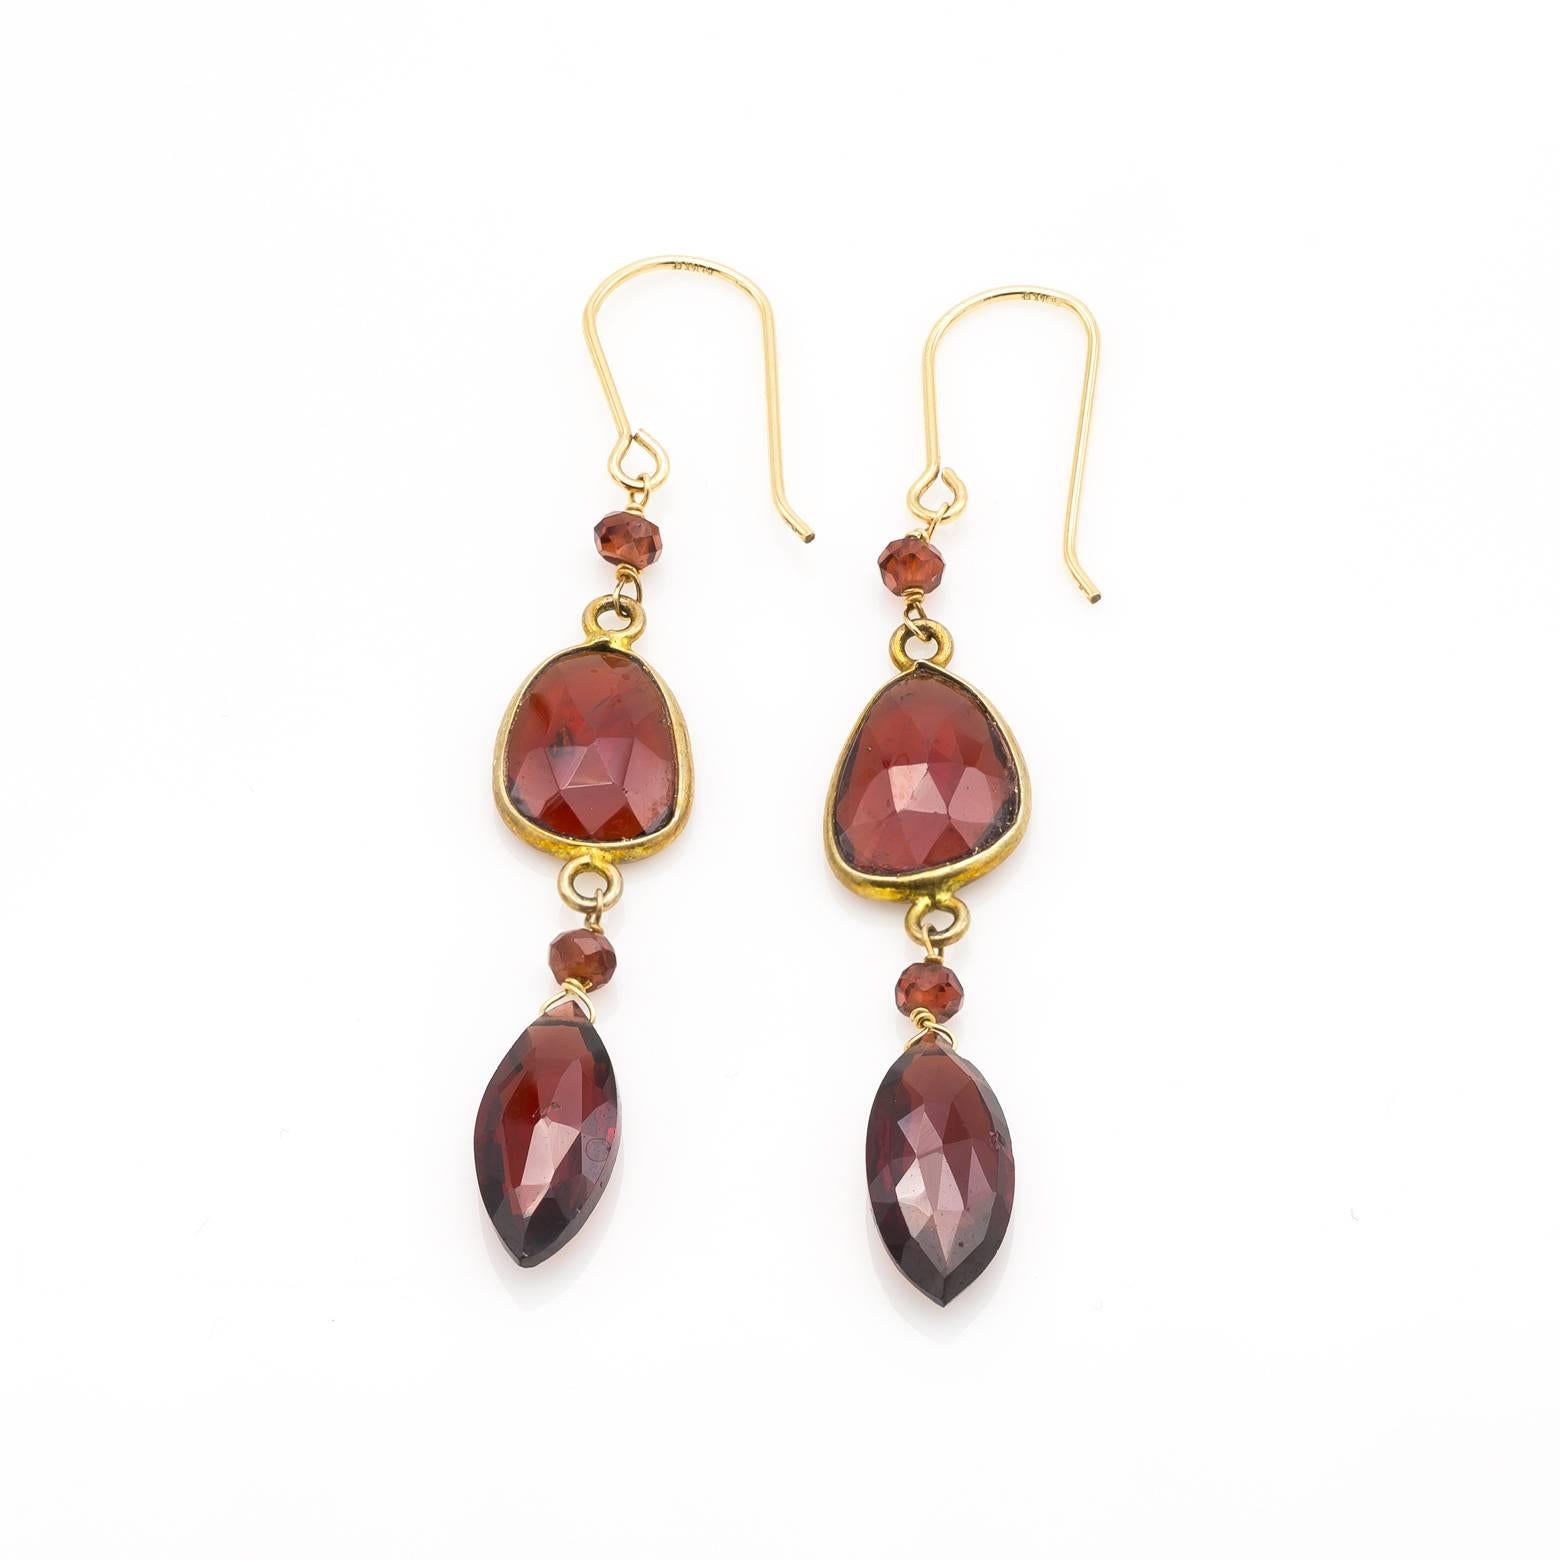 Stunning shades of cinnamon garnet light up these gorgeous earrings in the January birth stone. All beads faceted reflect and create elegance to dress up any outfit. Easily worn with great style these beautiful garnet earrings are a great addition